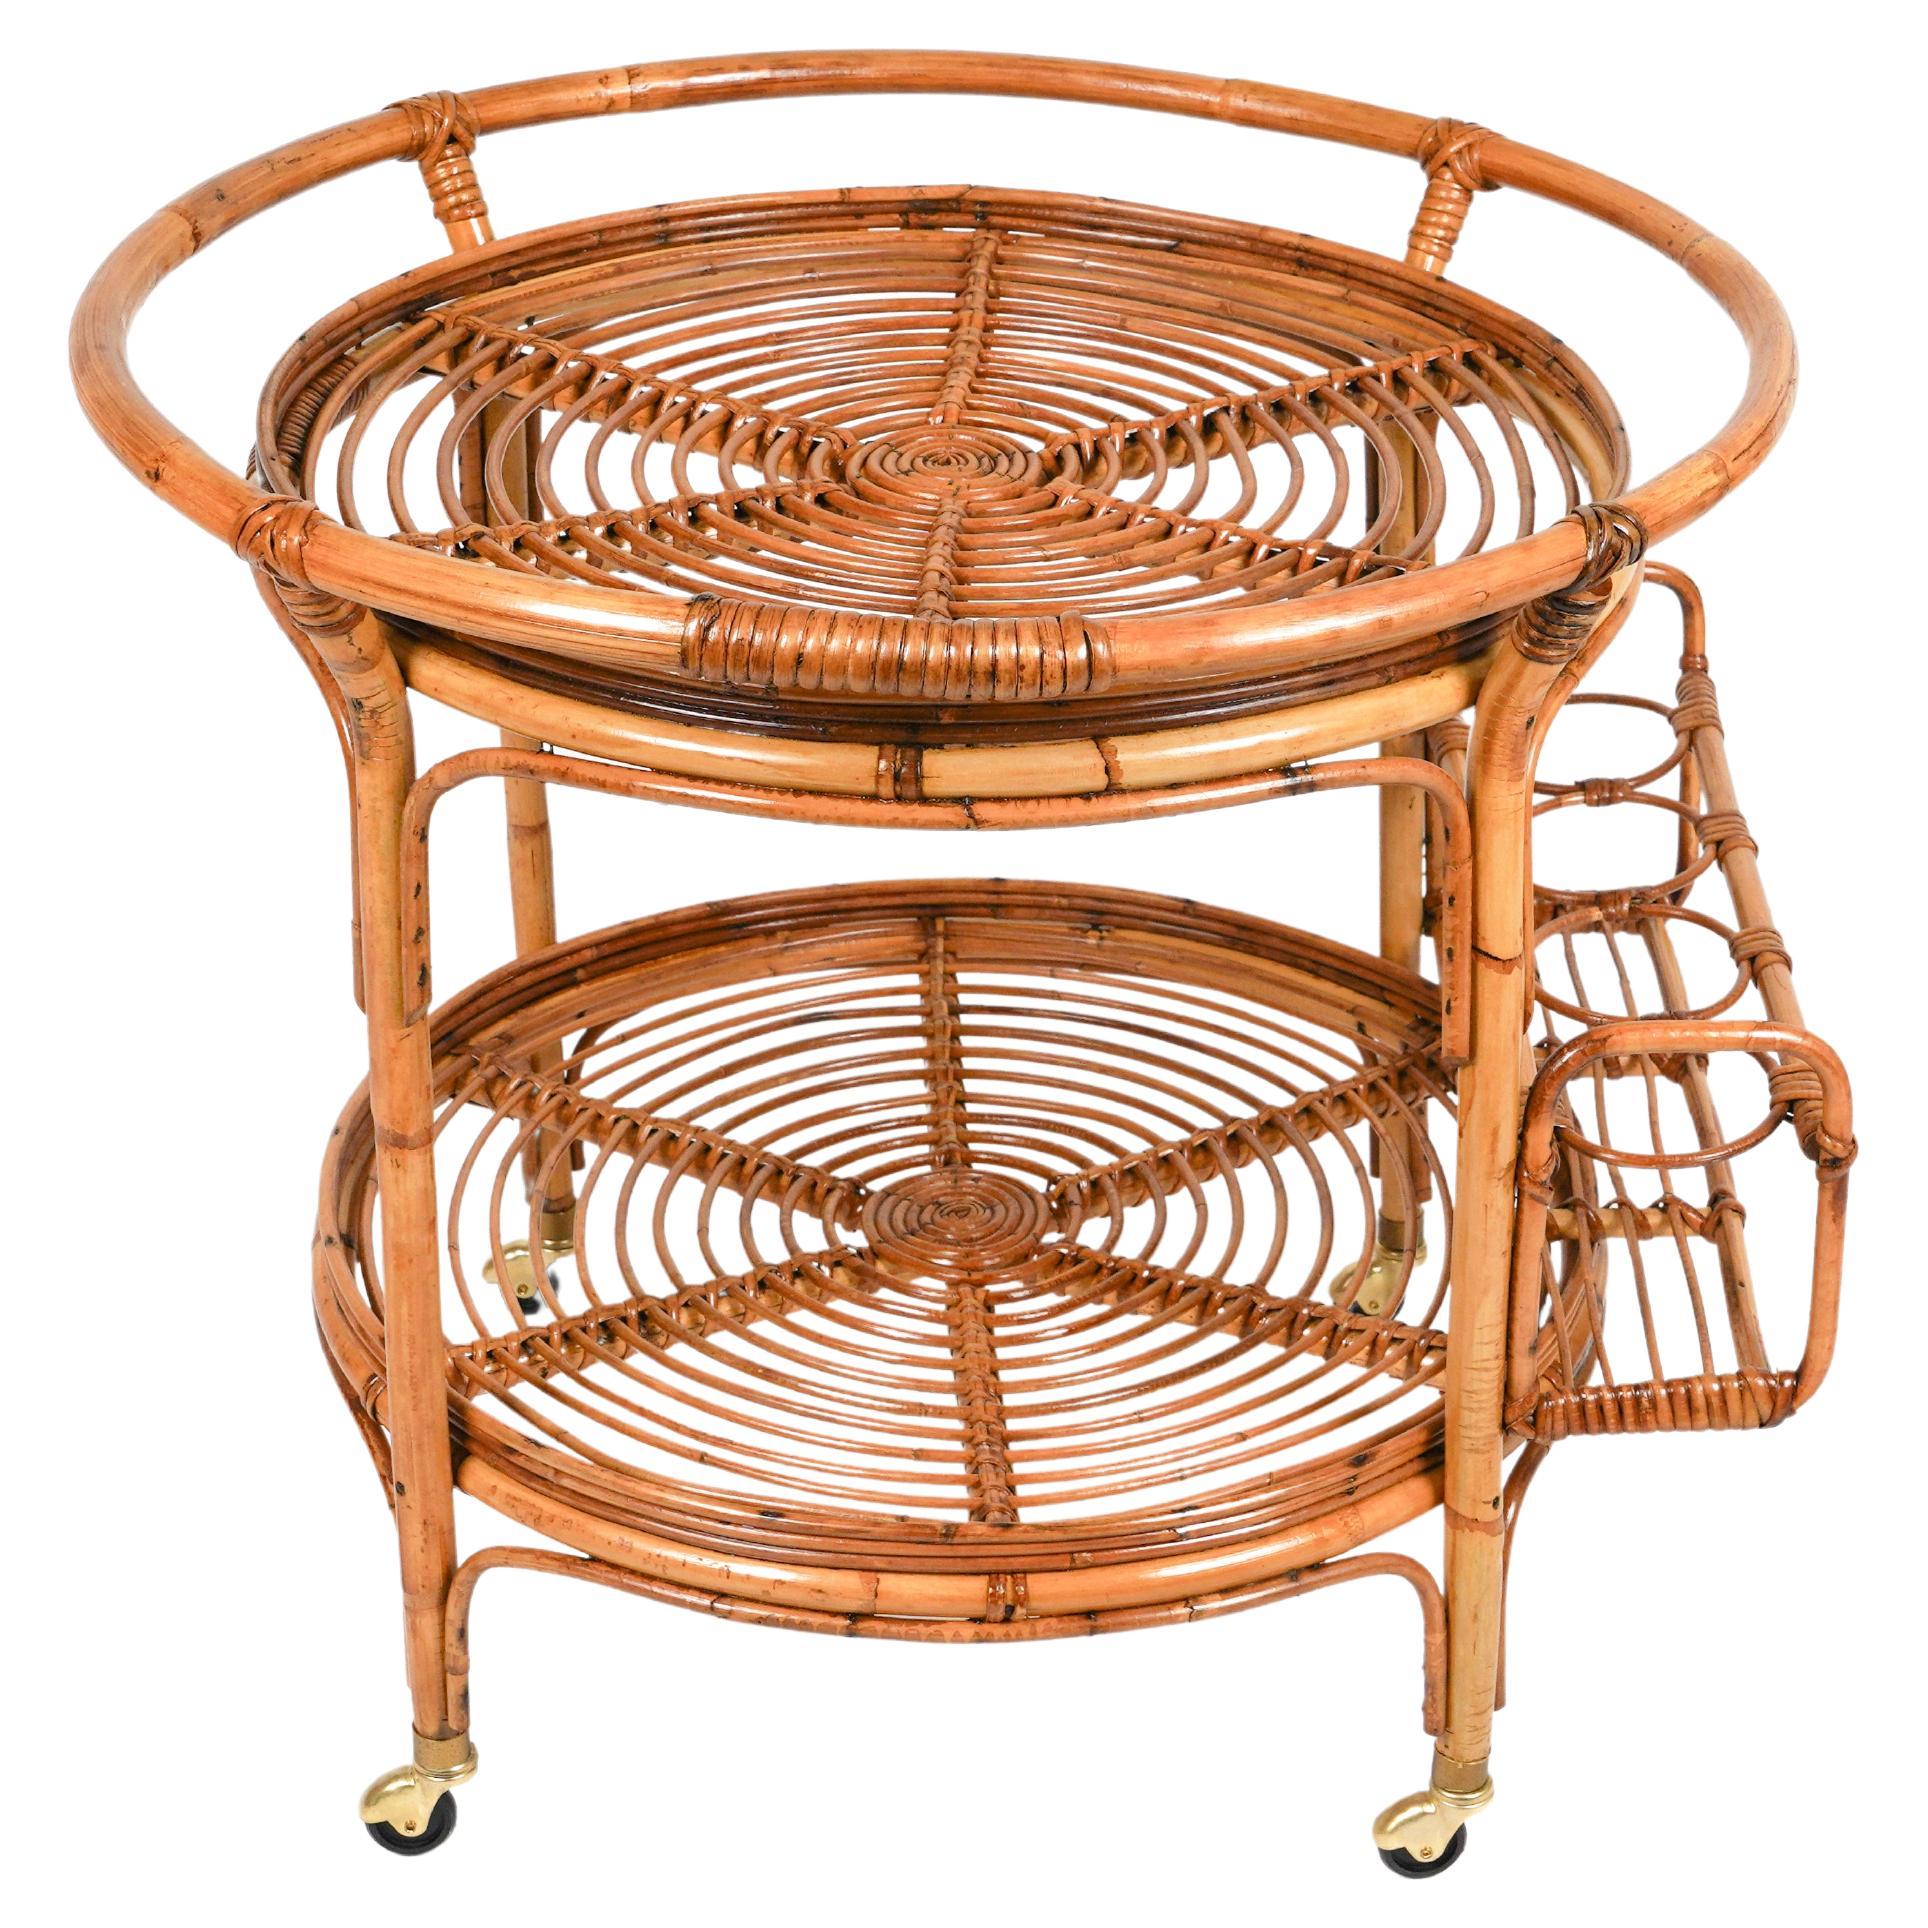 Amazing round serving bar cart in bamboo & rattan structure featuring two shelves. 

The upper one is framed by a bamboo handle and the lower one features four bottle holders mounted externally. 

Made in Italy in the 1960s.

Bamboo / rattan has